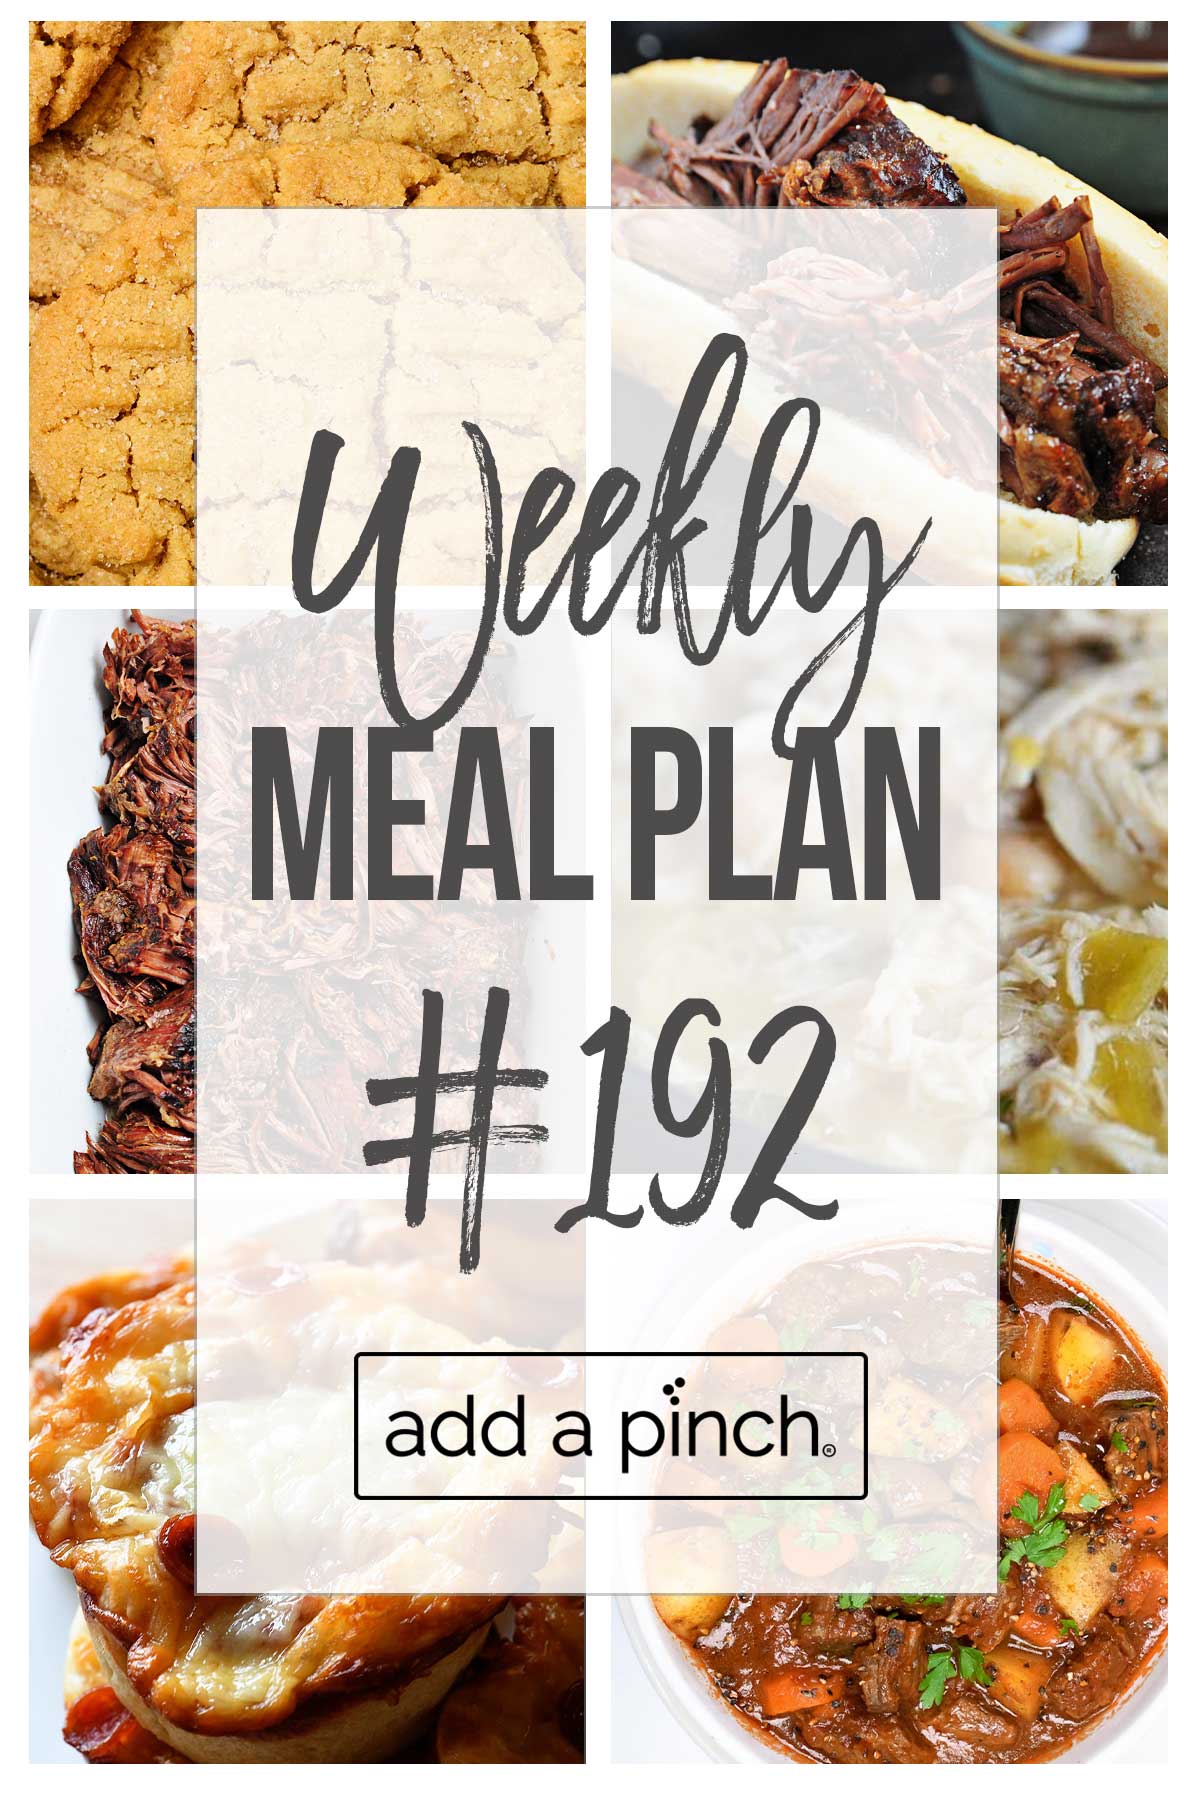 Graphic of Weekly Meal Plan #192.